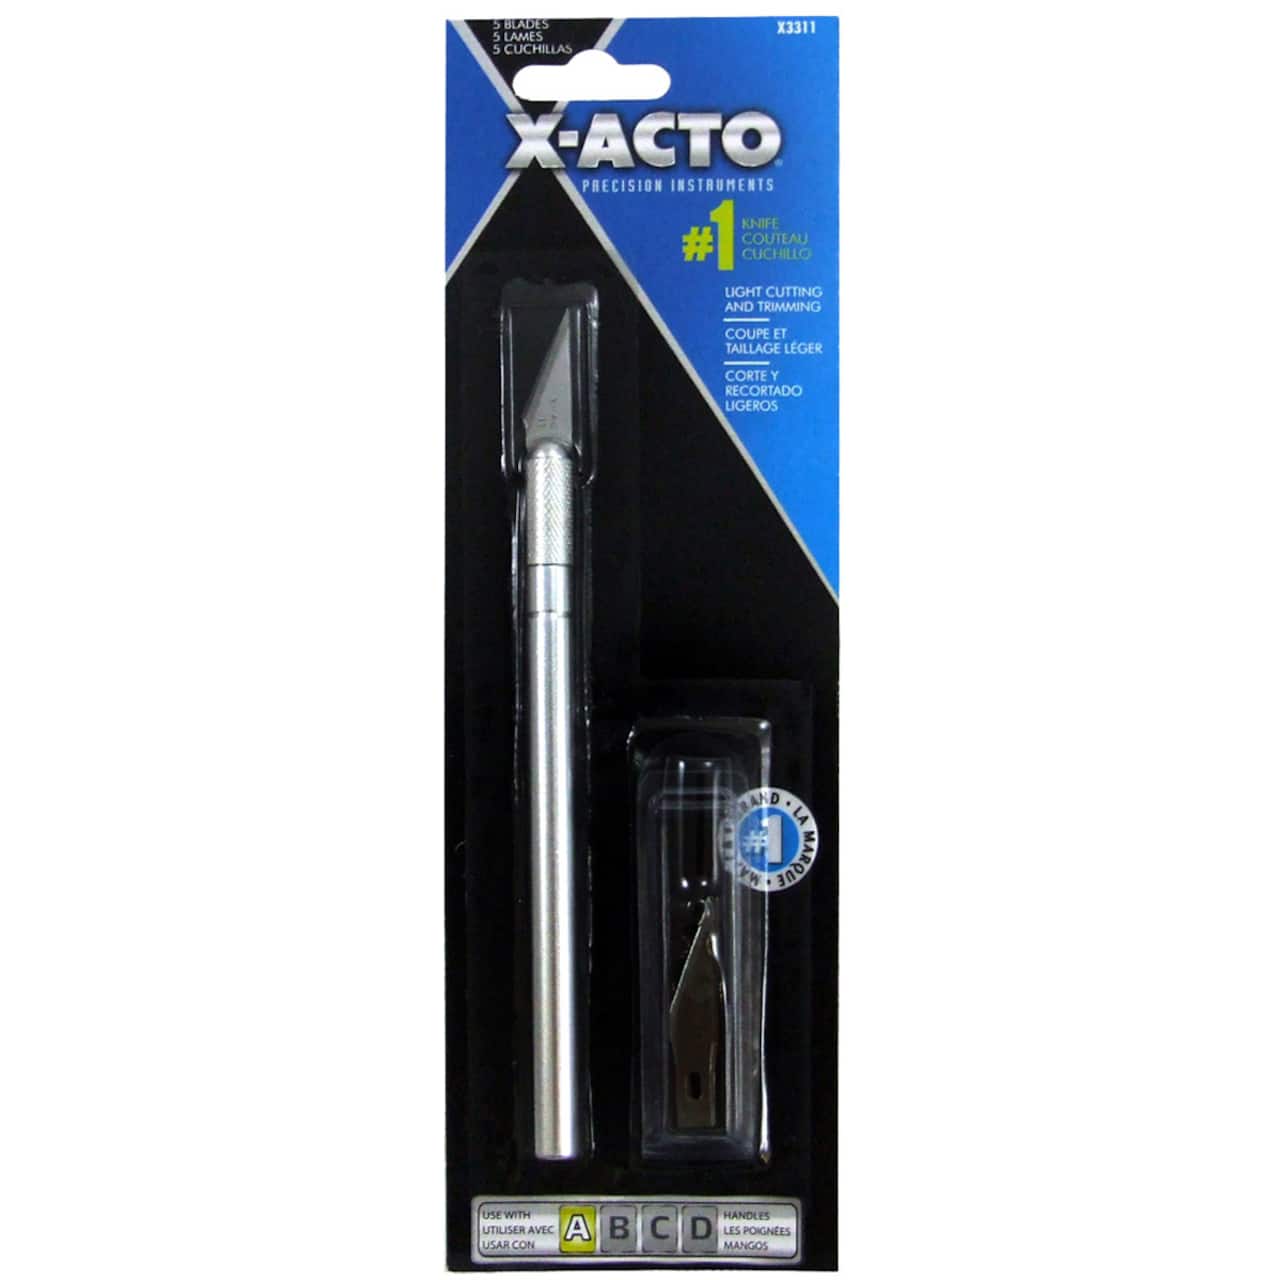 12 Pack: X-ACTO&#xAE; #1 Precision Knife Set